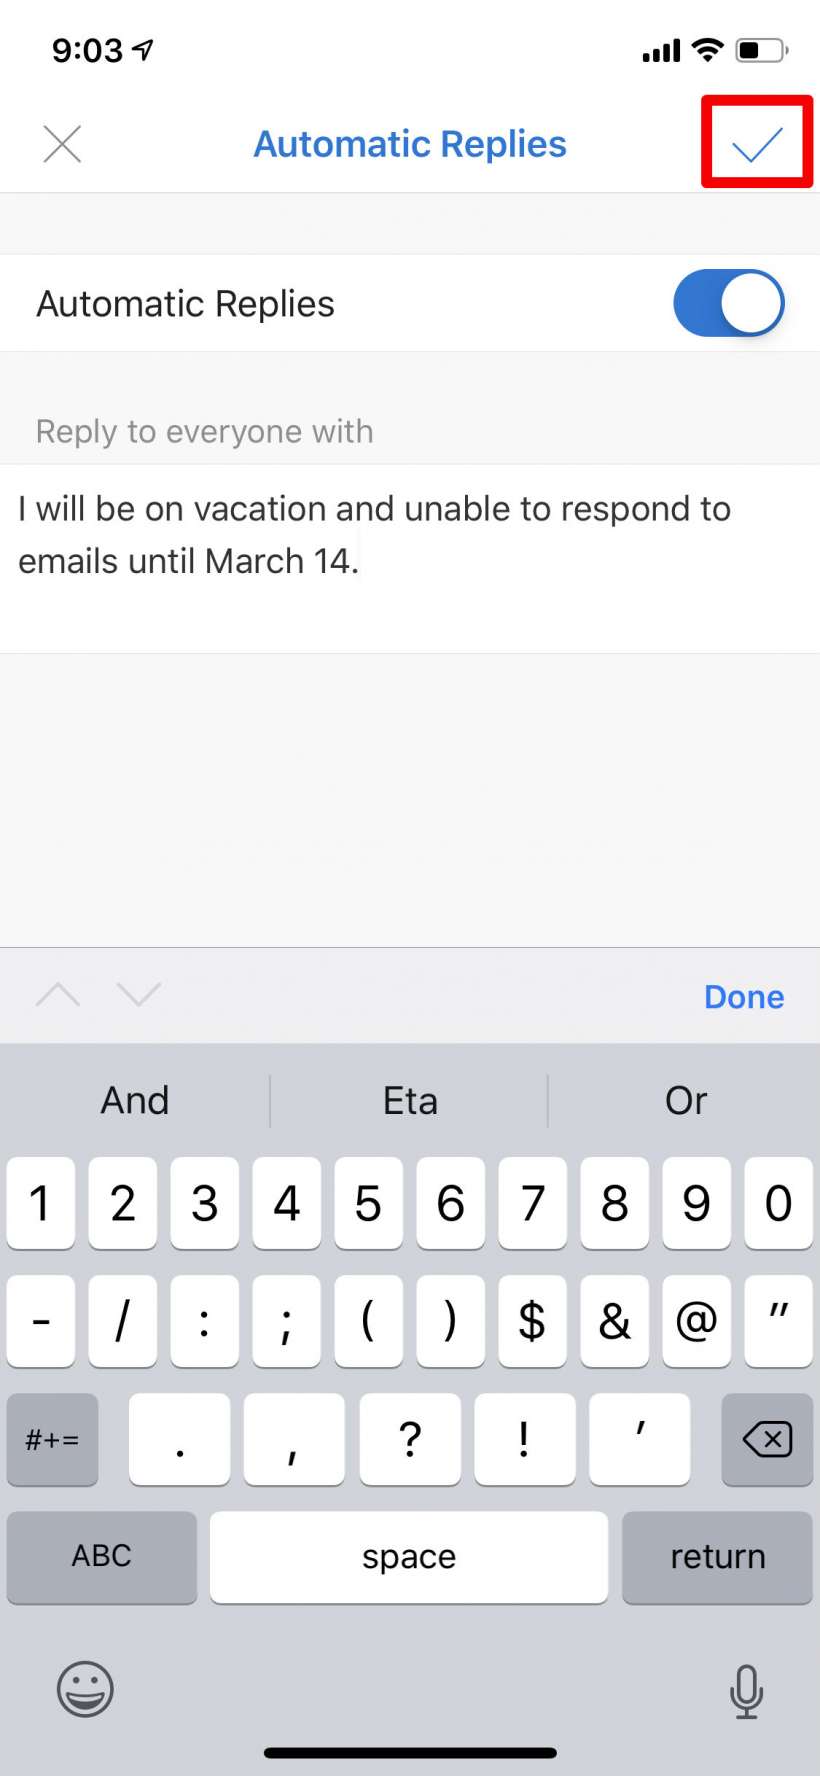 How to set up an out-of-office reply for Outlook on iPhone, iPad and Mac.